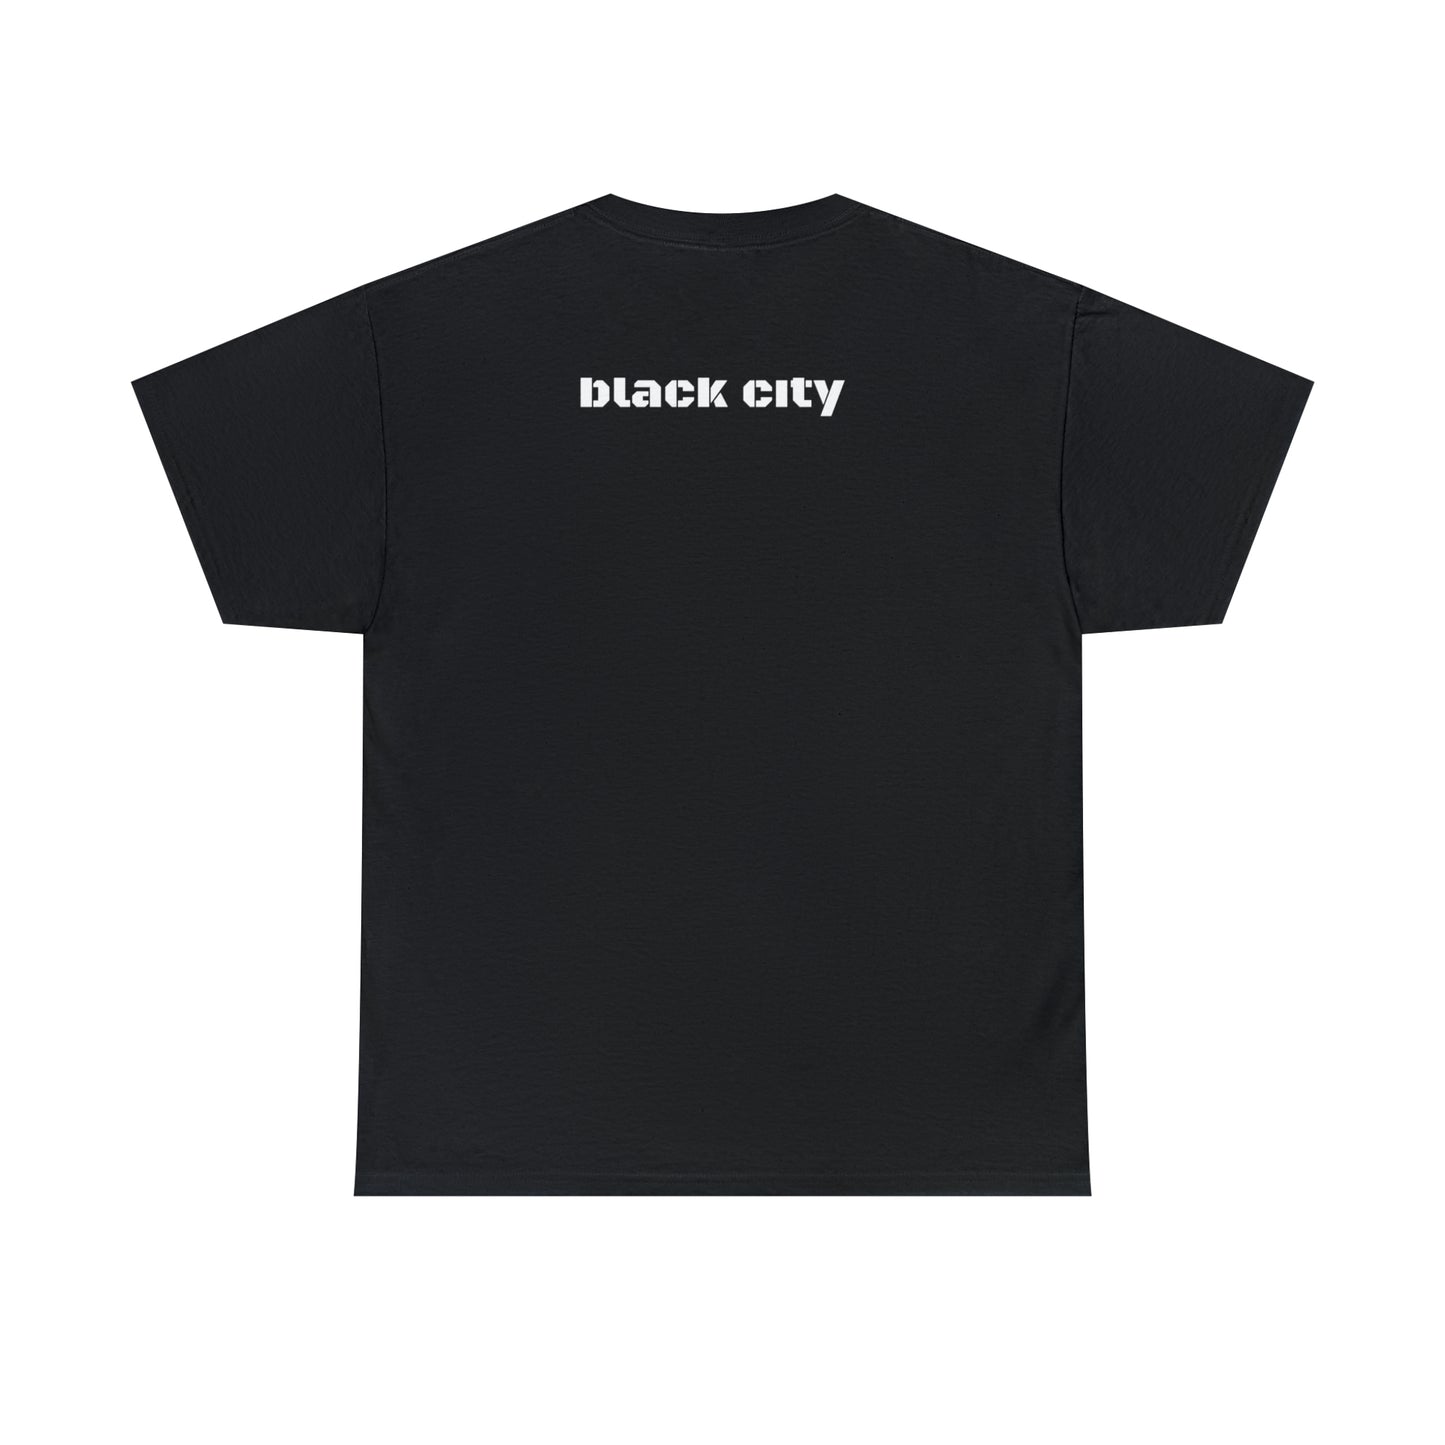 Black Panther Party Heavy Cotton Tee